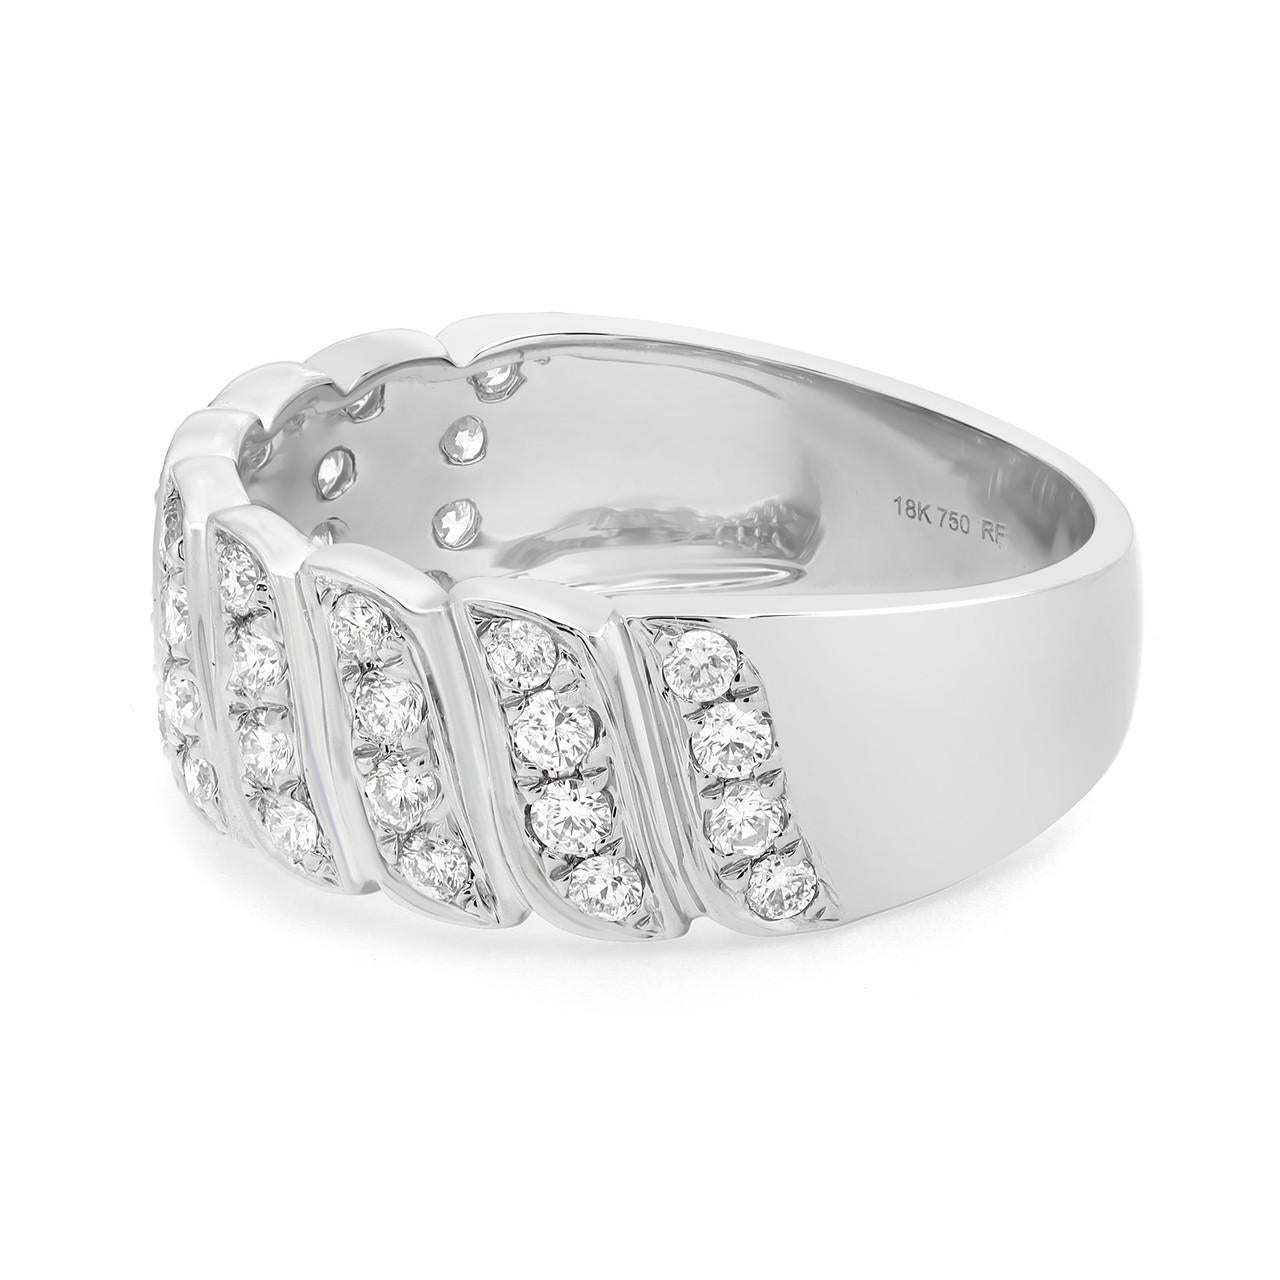 Introducing our breathtaking 0.53 Carat Round Cut Diamond Band Ring in 18K White Gold. This stunning piece is guaranteed to catch the eye with its dazzling display of diamonds. The fashionable and classic design of this diamond band ring makes it a